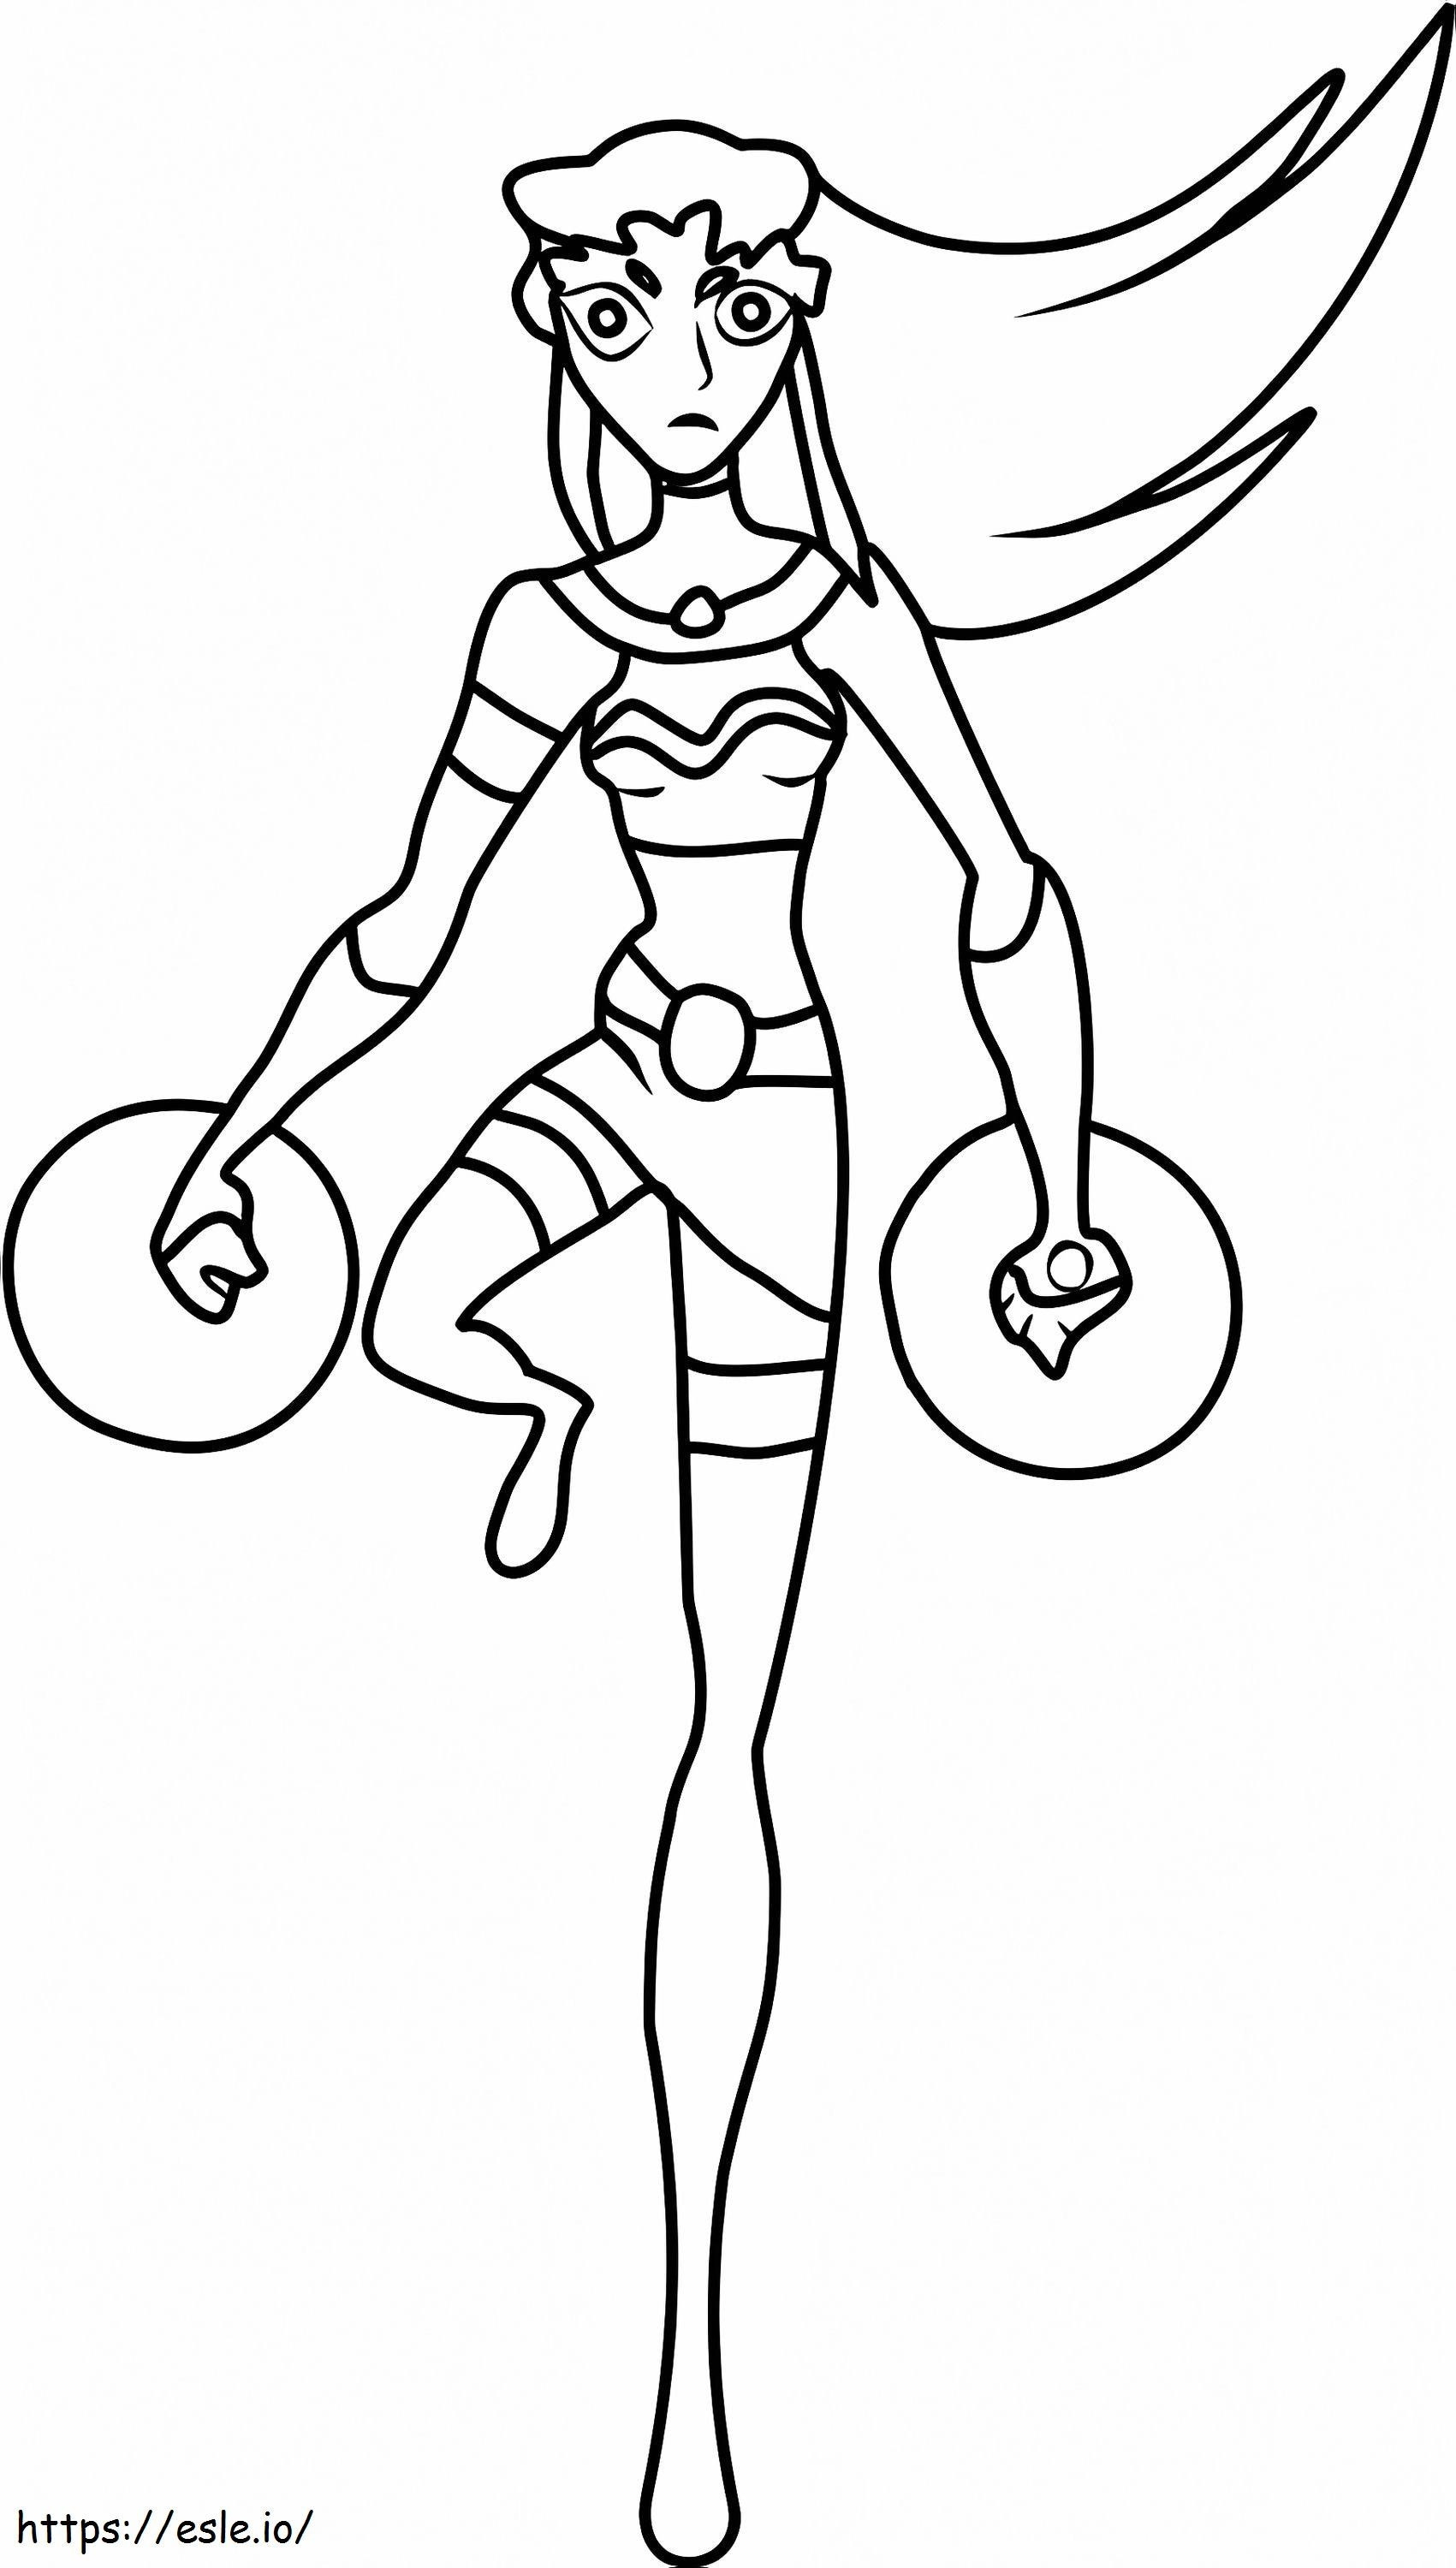 Starfire1 coloring page